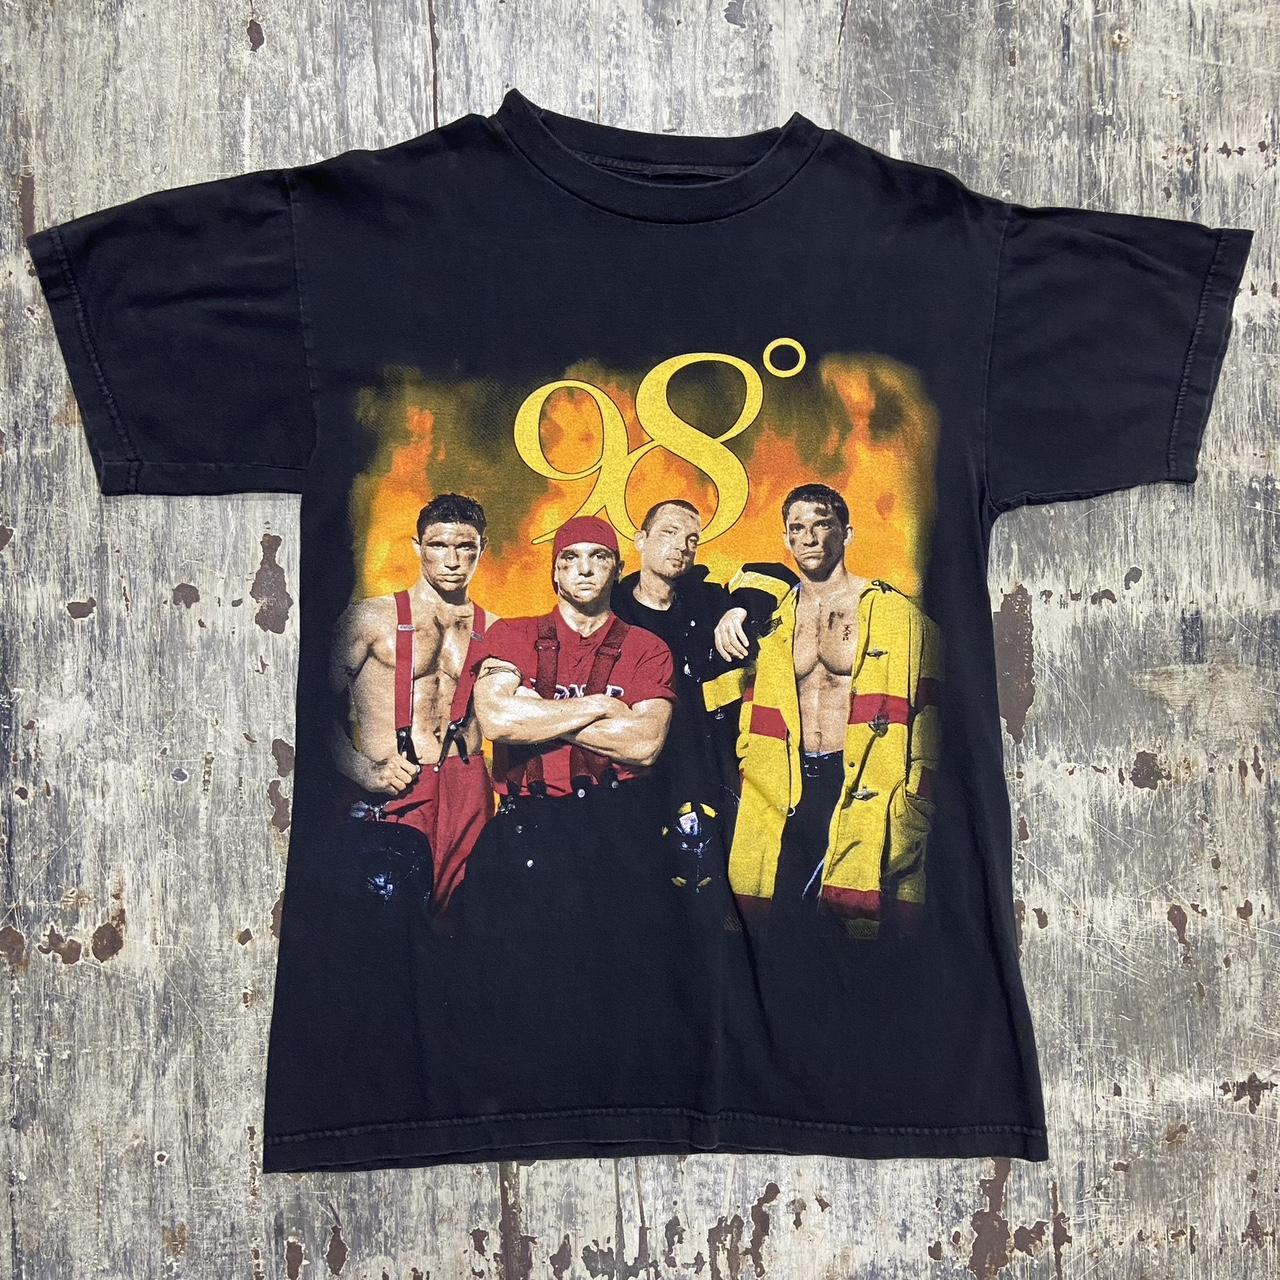 98 degrees band tour heating up tee, Good condition